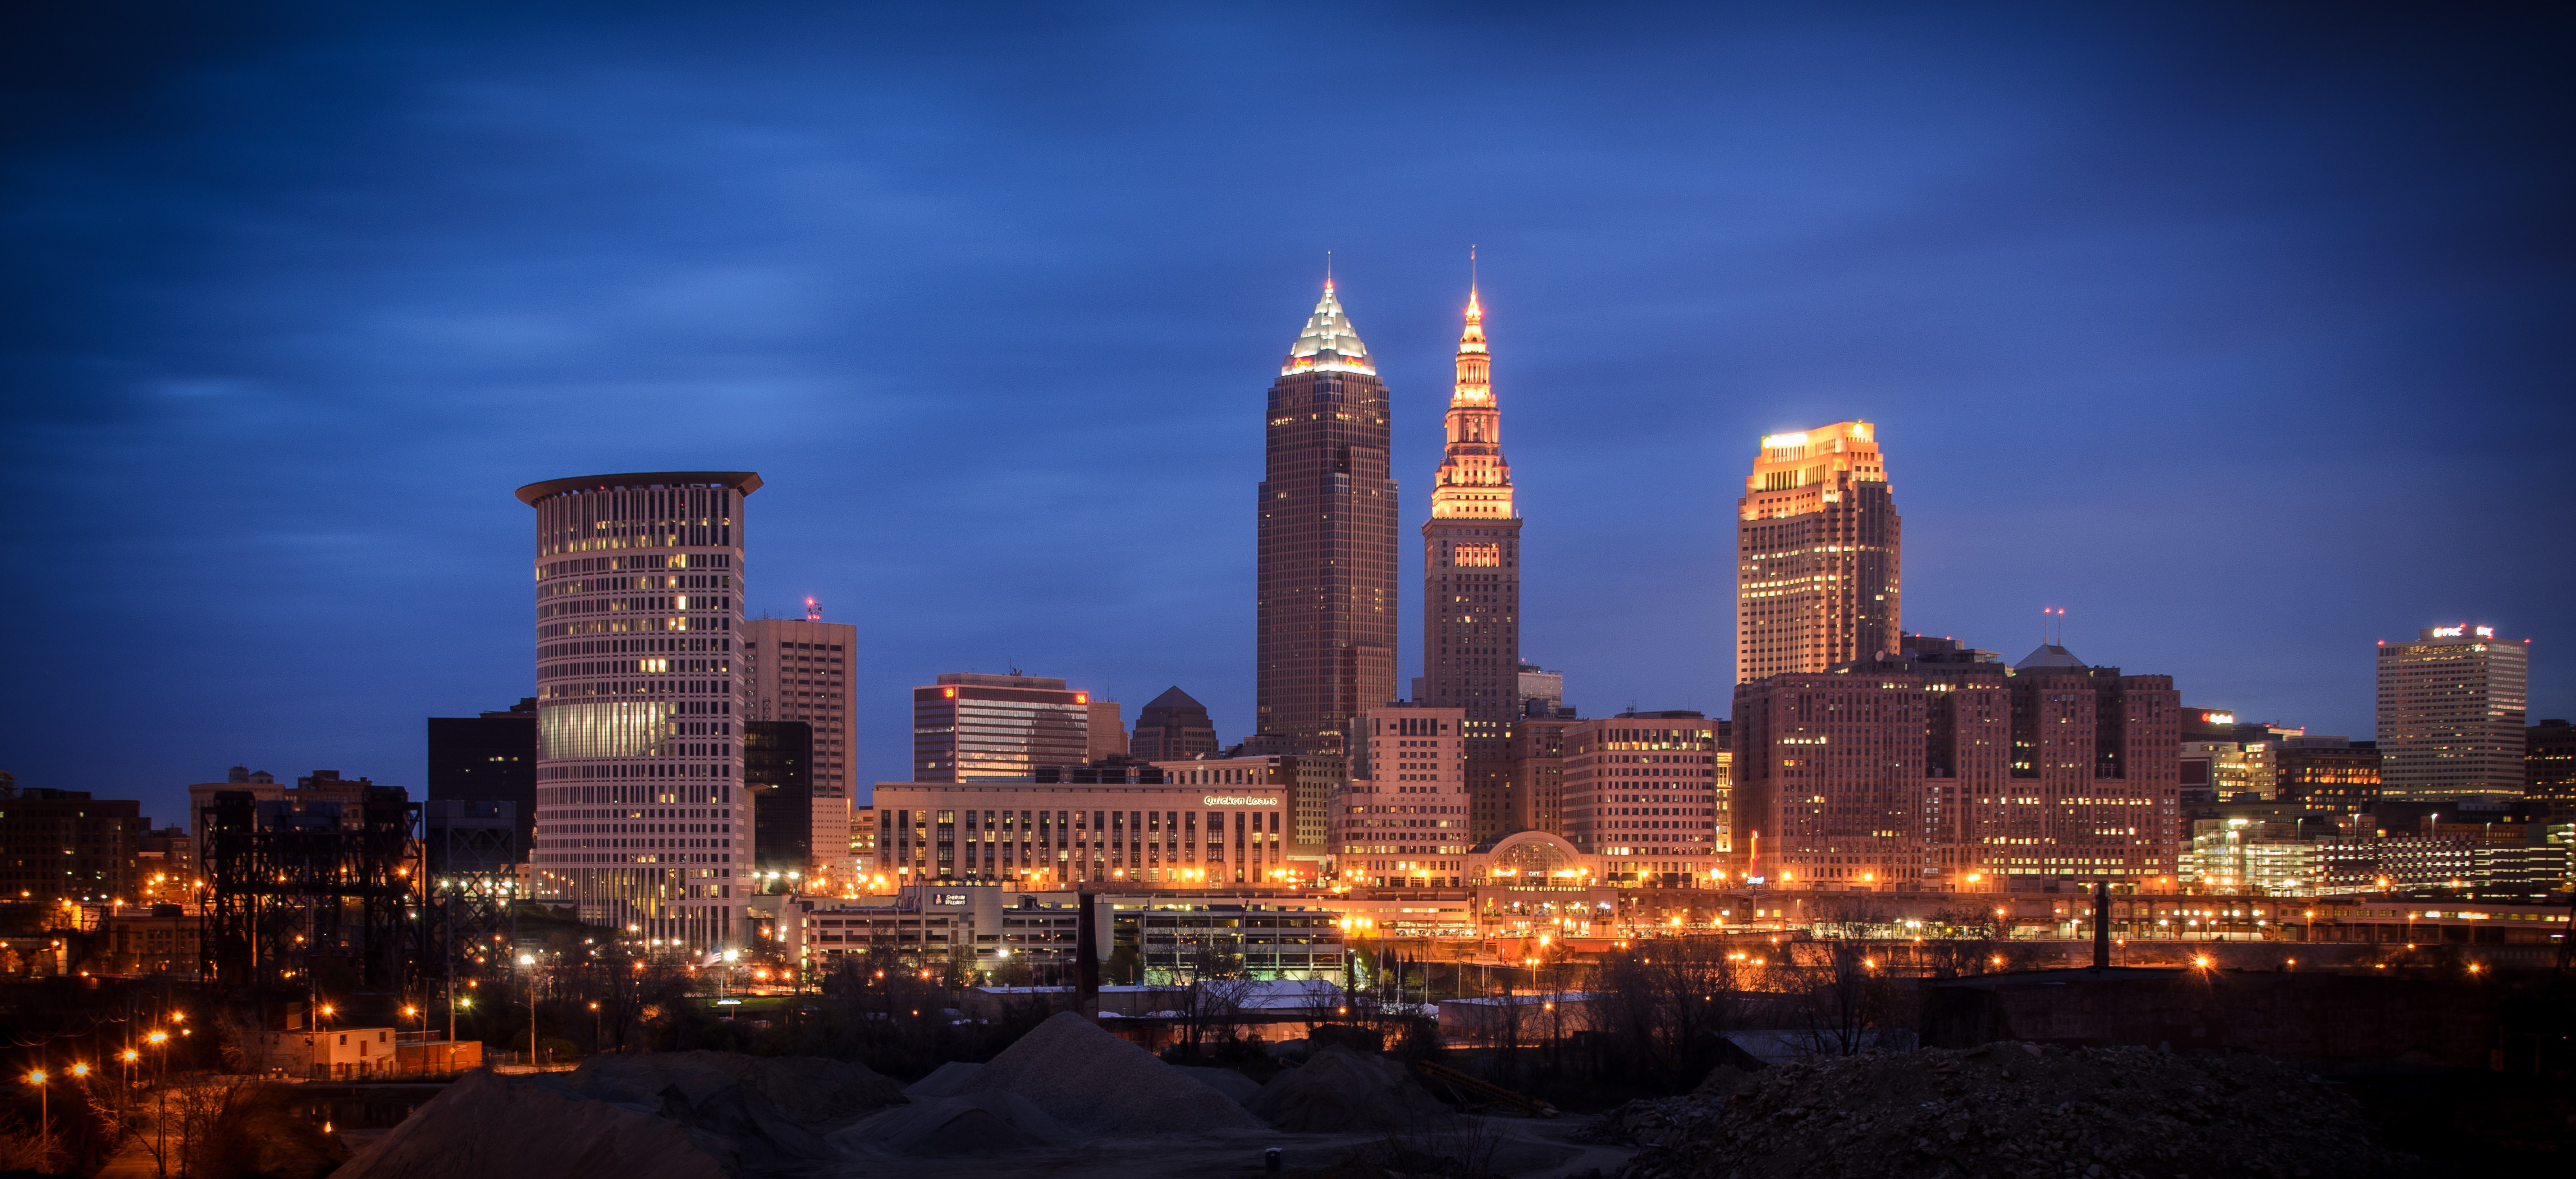 Nice Images Collection: Cleveland Desktop Wallpapers